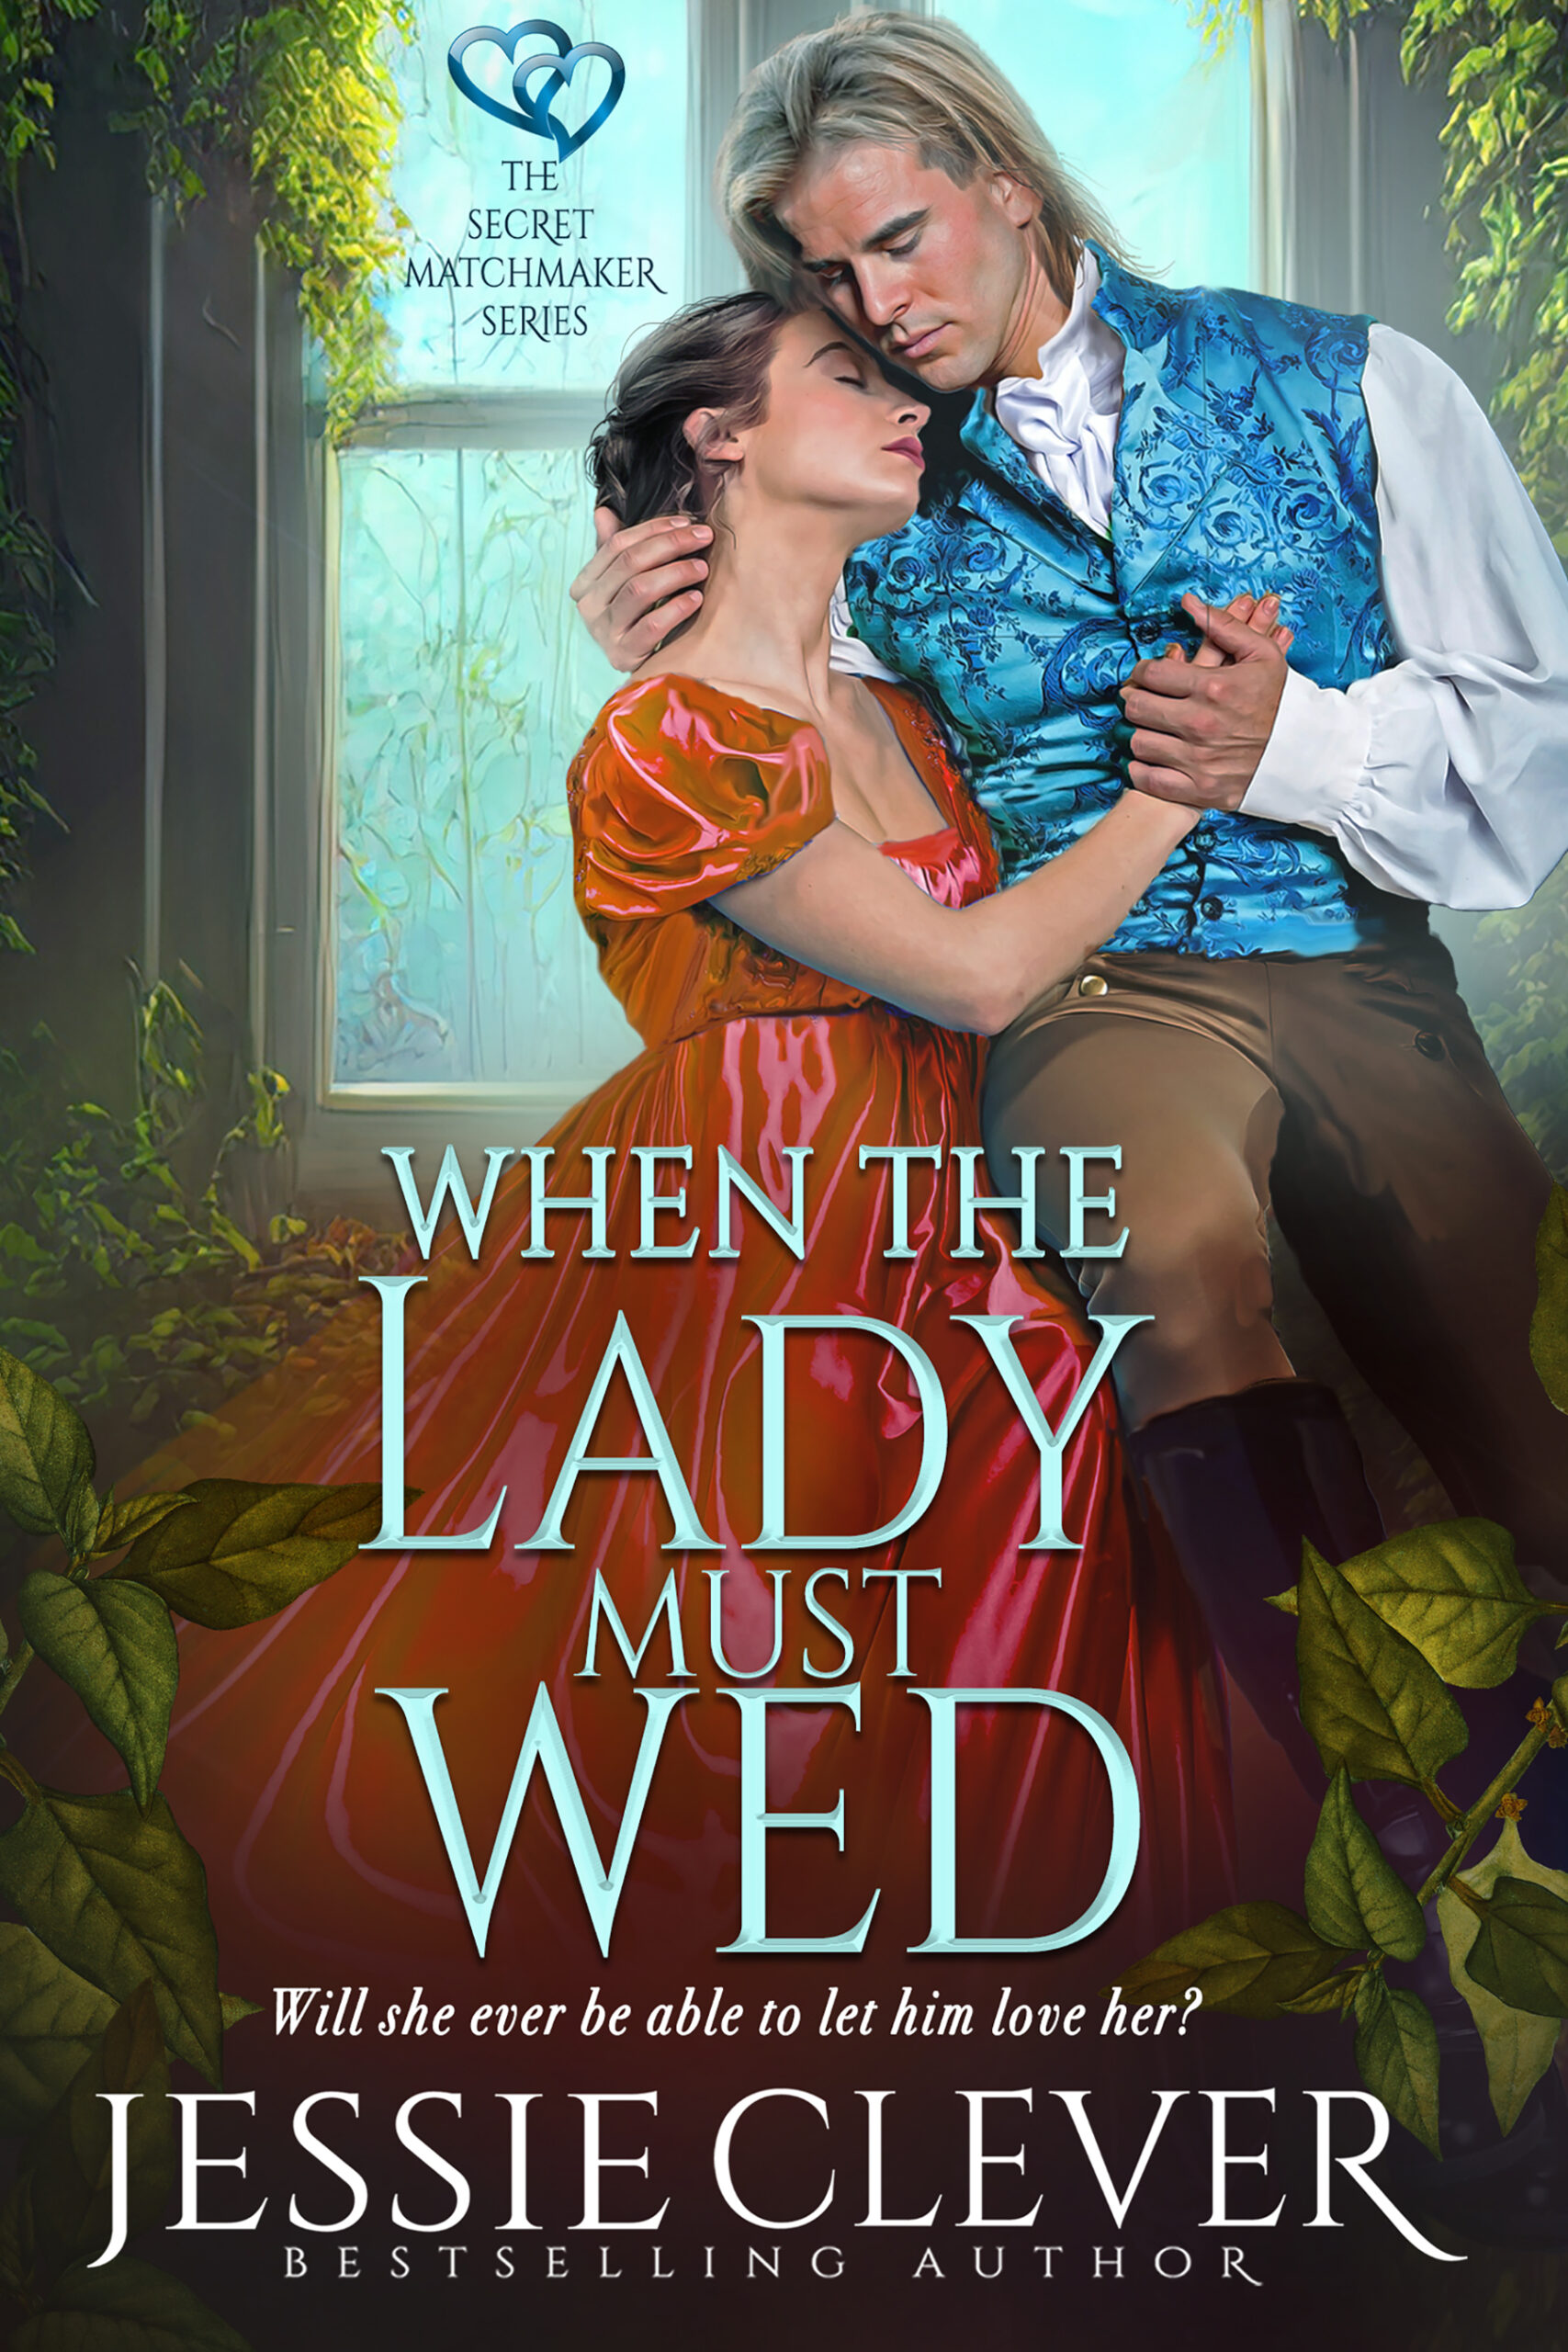 Enjoy an Excerpt from When the Lady Must Wed